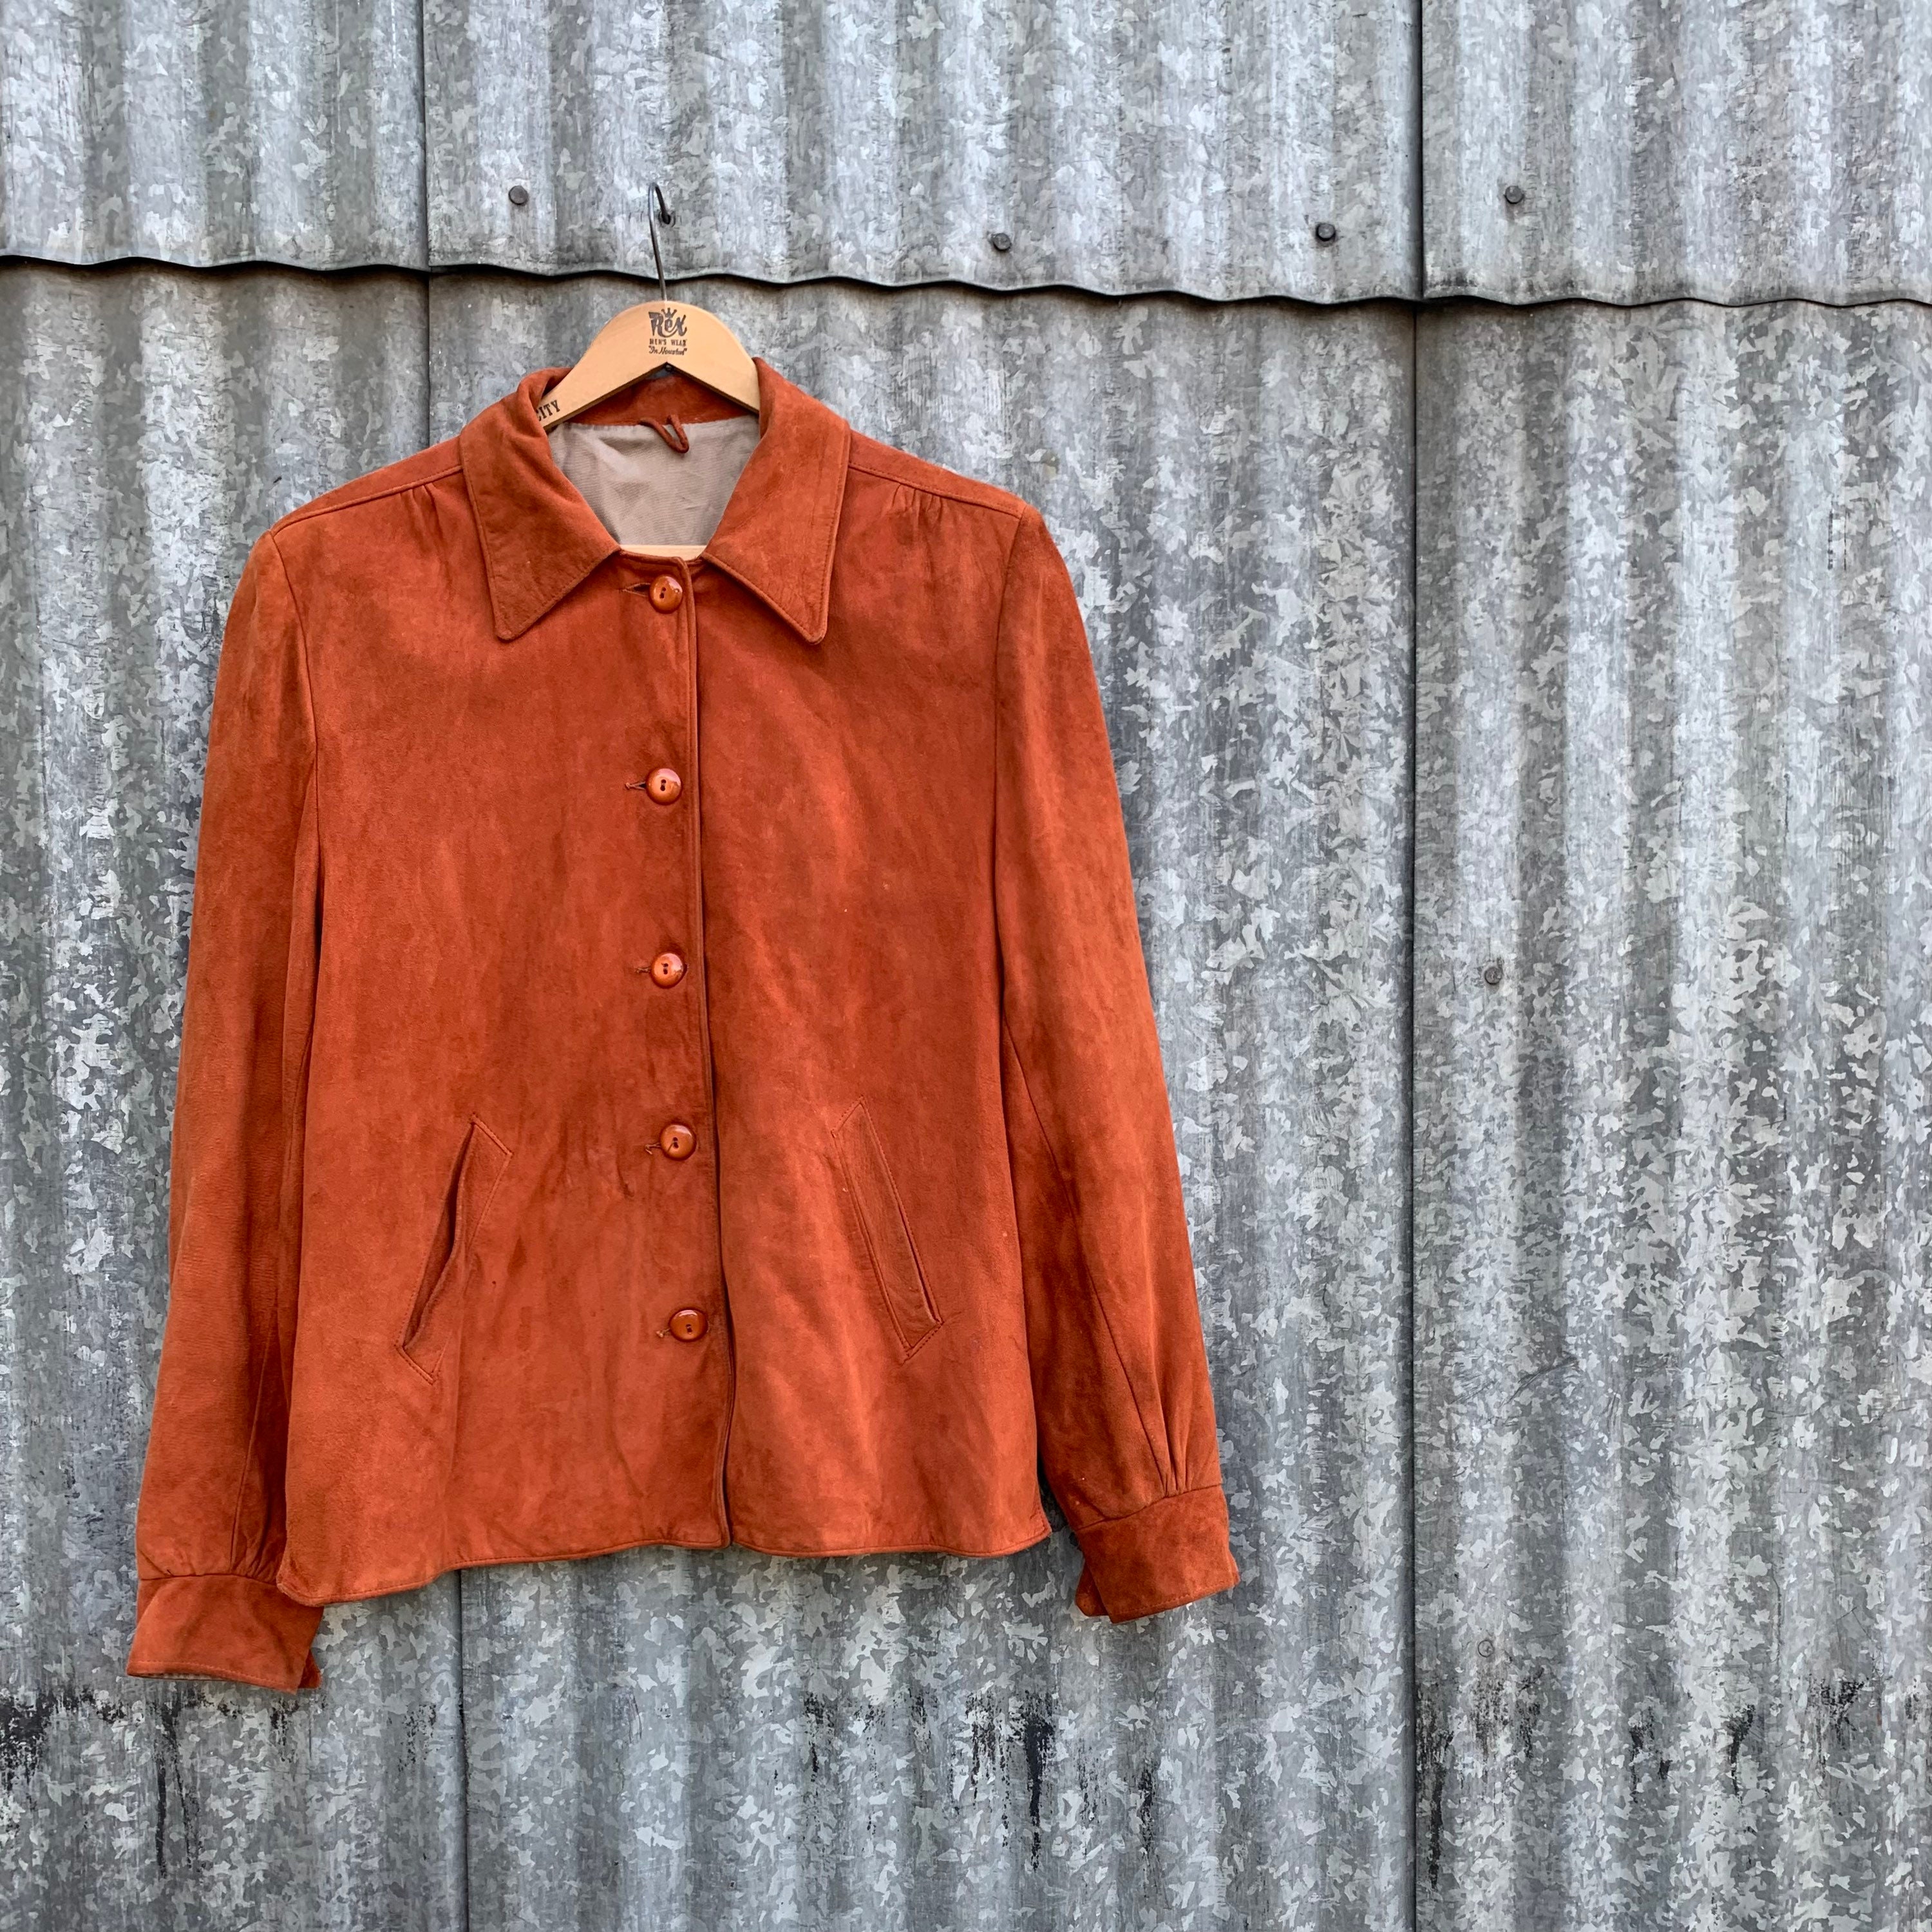 Real Vintage Search Engine Vintage 1940s Rusty Orange -Colored Chamois Leather Jacket with Bakelite Buttons Womens Size Large 40s Workwear $145.00 AT vintagedancer.com